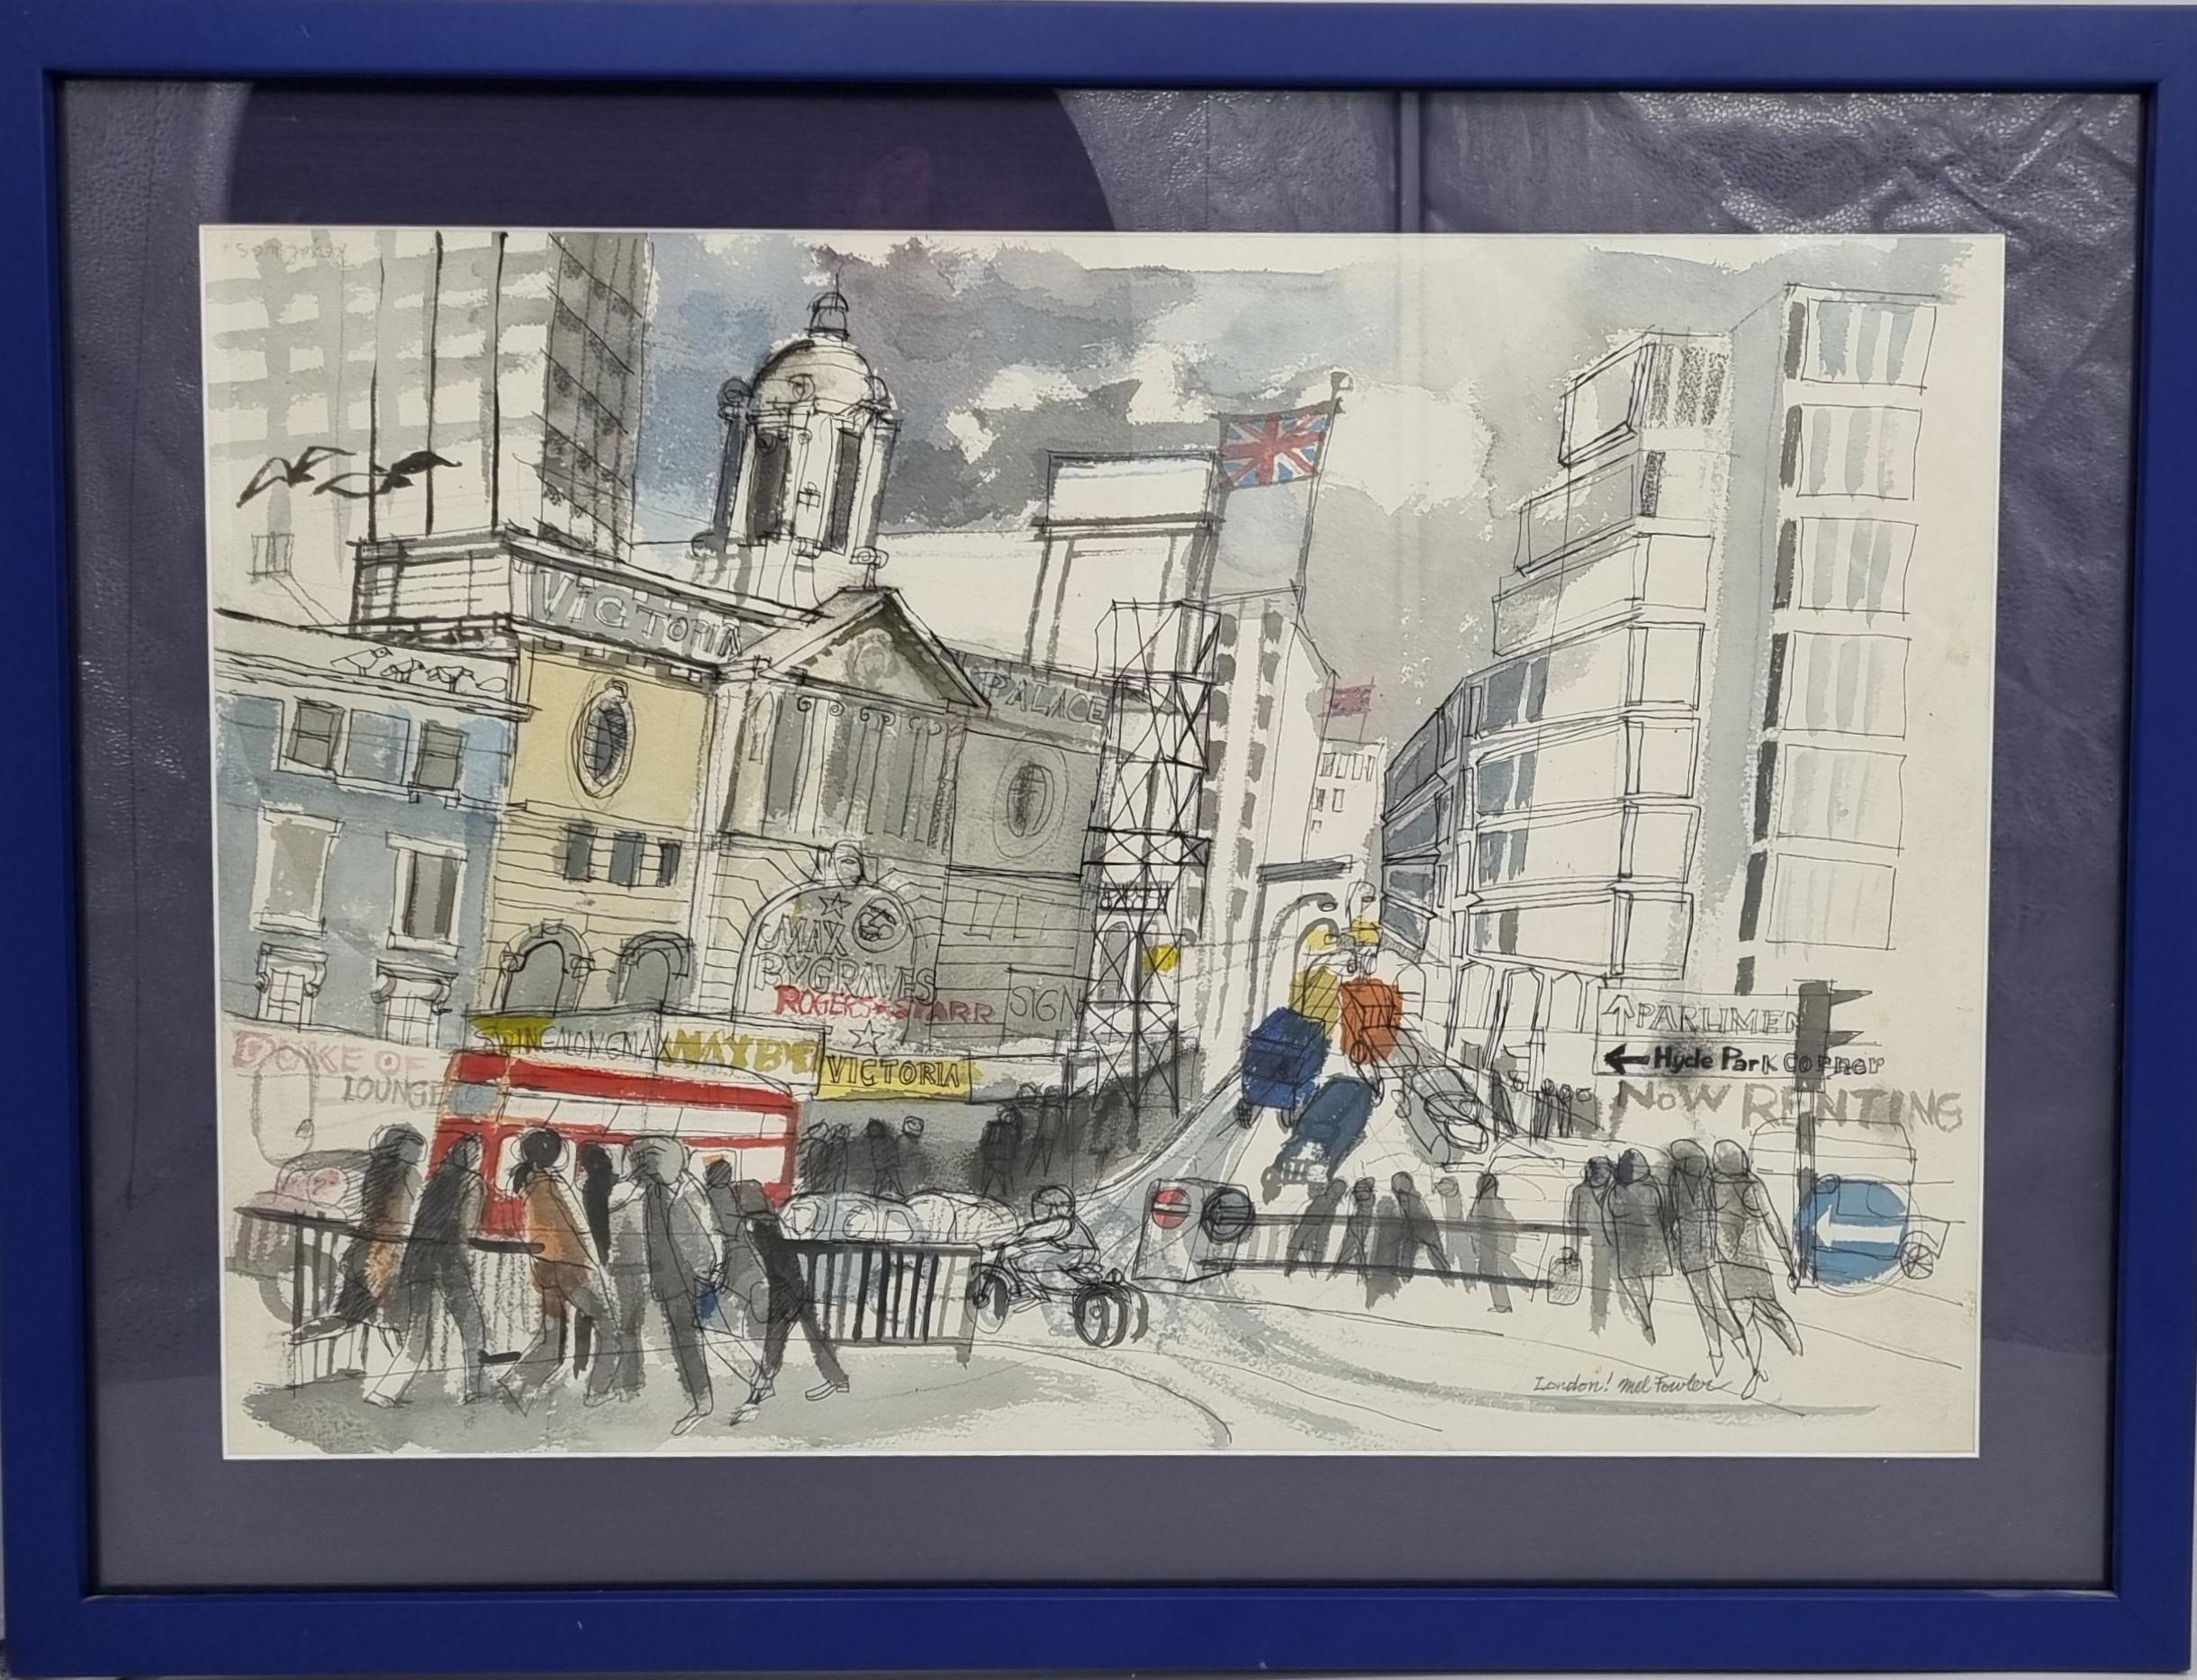  A lovely charismatic Water colour painting by Mel Fowler 1921-1987 . This busy London London street scene was painted by the artist during the late 1960s early 70s .

Mel Fowler (1921-1987) was a listed Italian-American painter known for his cubist